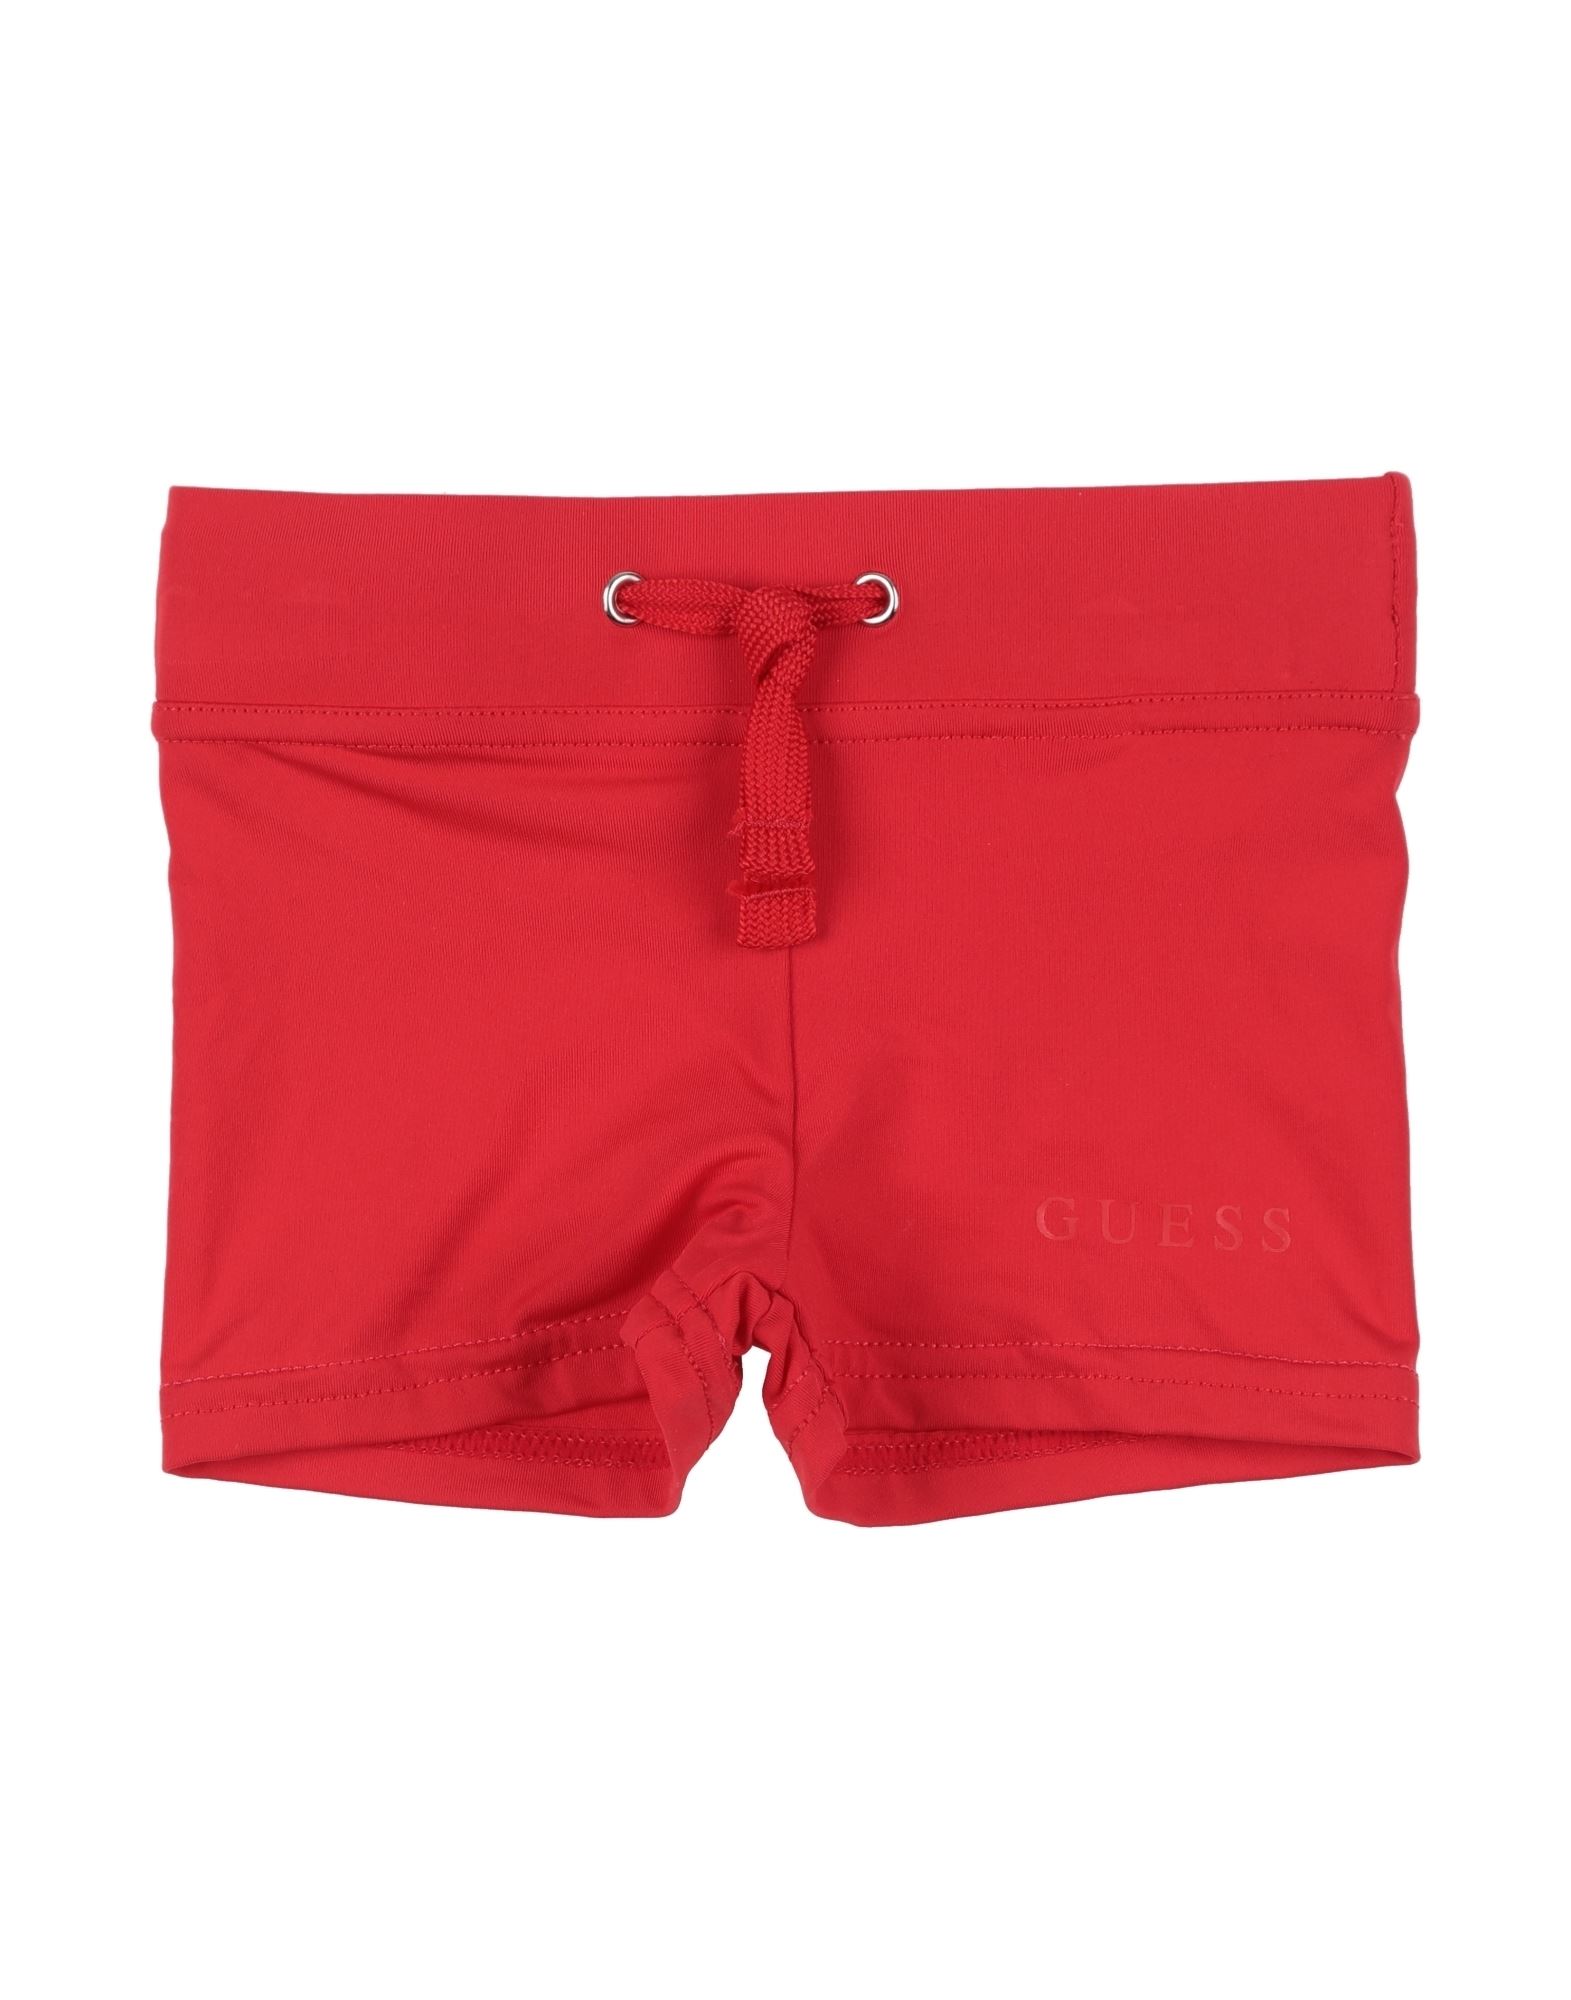 GUESS Badeboxer Kinder Rot von GUESS